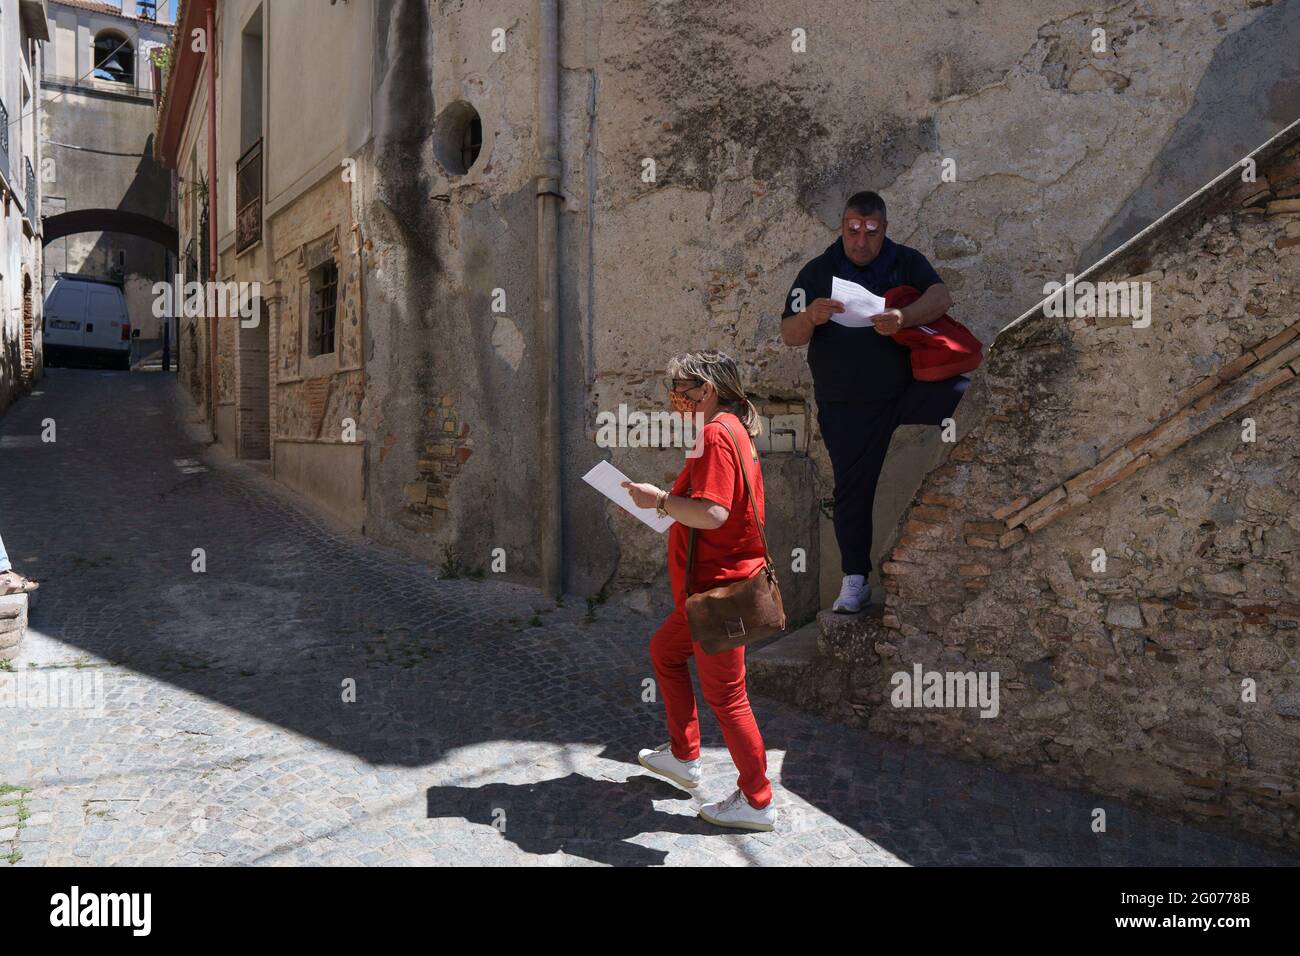 Riace, Italy. 22nd May, 2021. A woman giving out the new list pamphlets during the press conference.Domenico Lucano “Mimmo”, former pro-migrant mayor of Riace, presented the electoral list “Un'Altra Calabria è possibile” (Another Calabria is possible) for the 2021 Calabrian regional election during a press conference hosted by Journalist Pietro Melia close to the local restaurant 'Taverna Donna Rosa'. The list will support the candidature of the mayor of Napoli, Luigi de Magistris, as Calabria Region's Governor. (Photo by Valeria Ferraro/SOPA Images/Sipa USA) Credit: Sipa USA/Alamy Live News Stock Photo